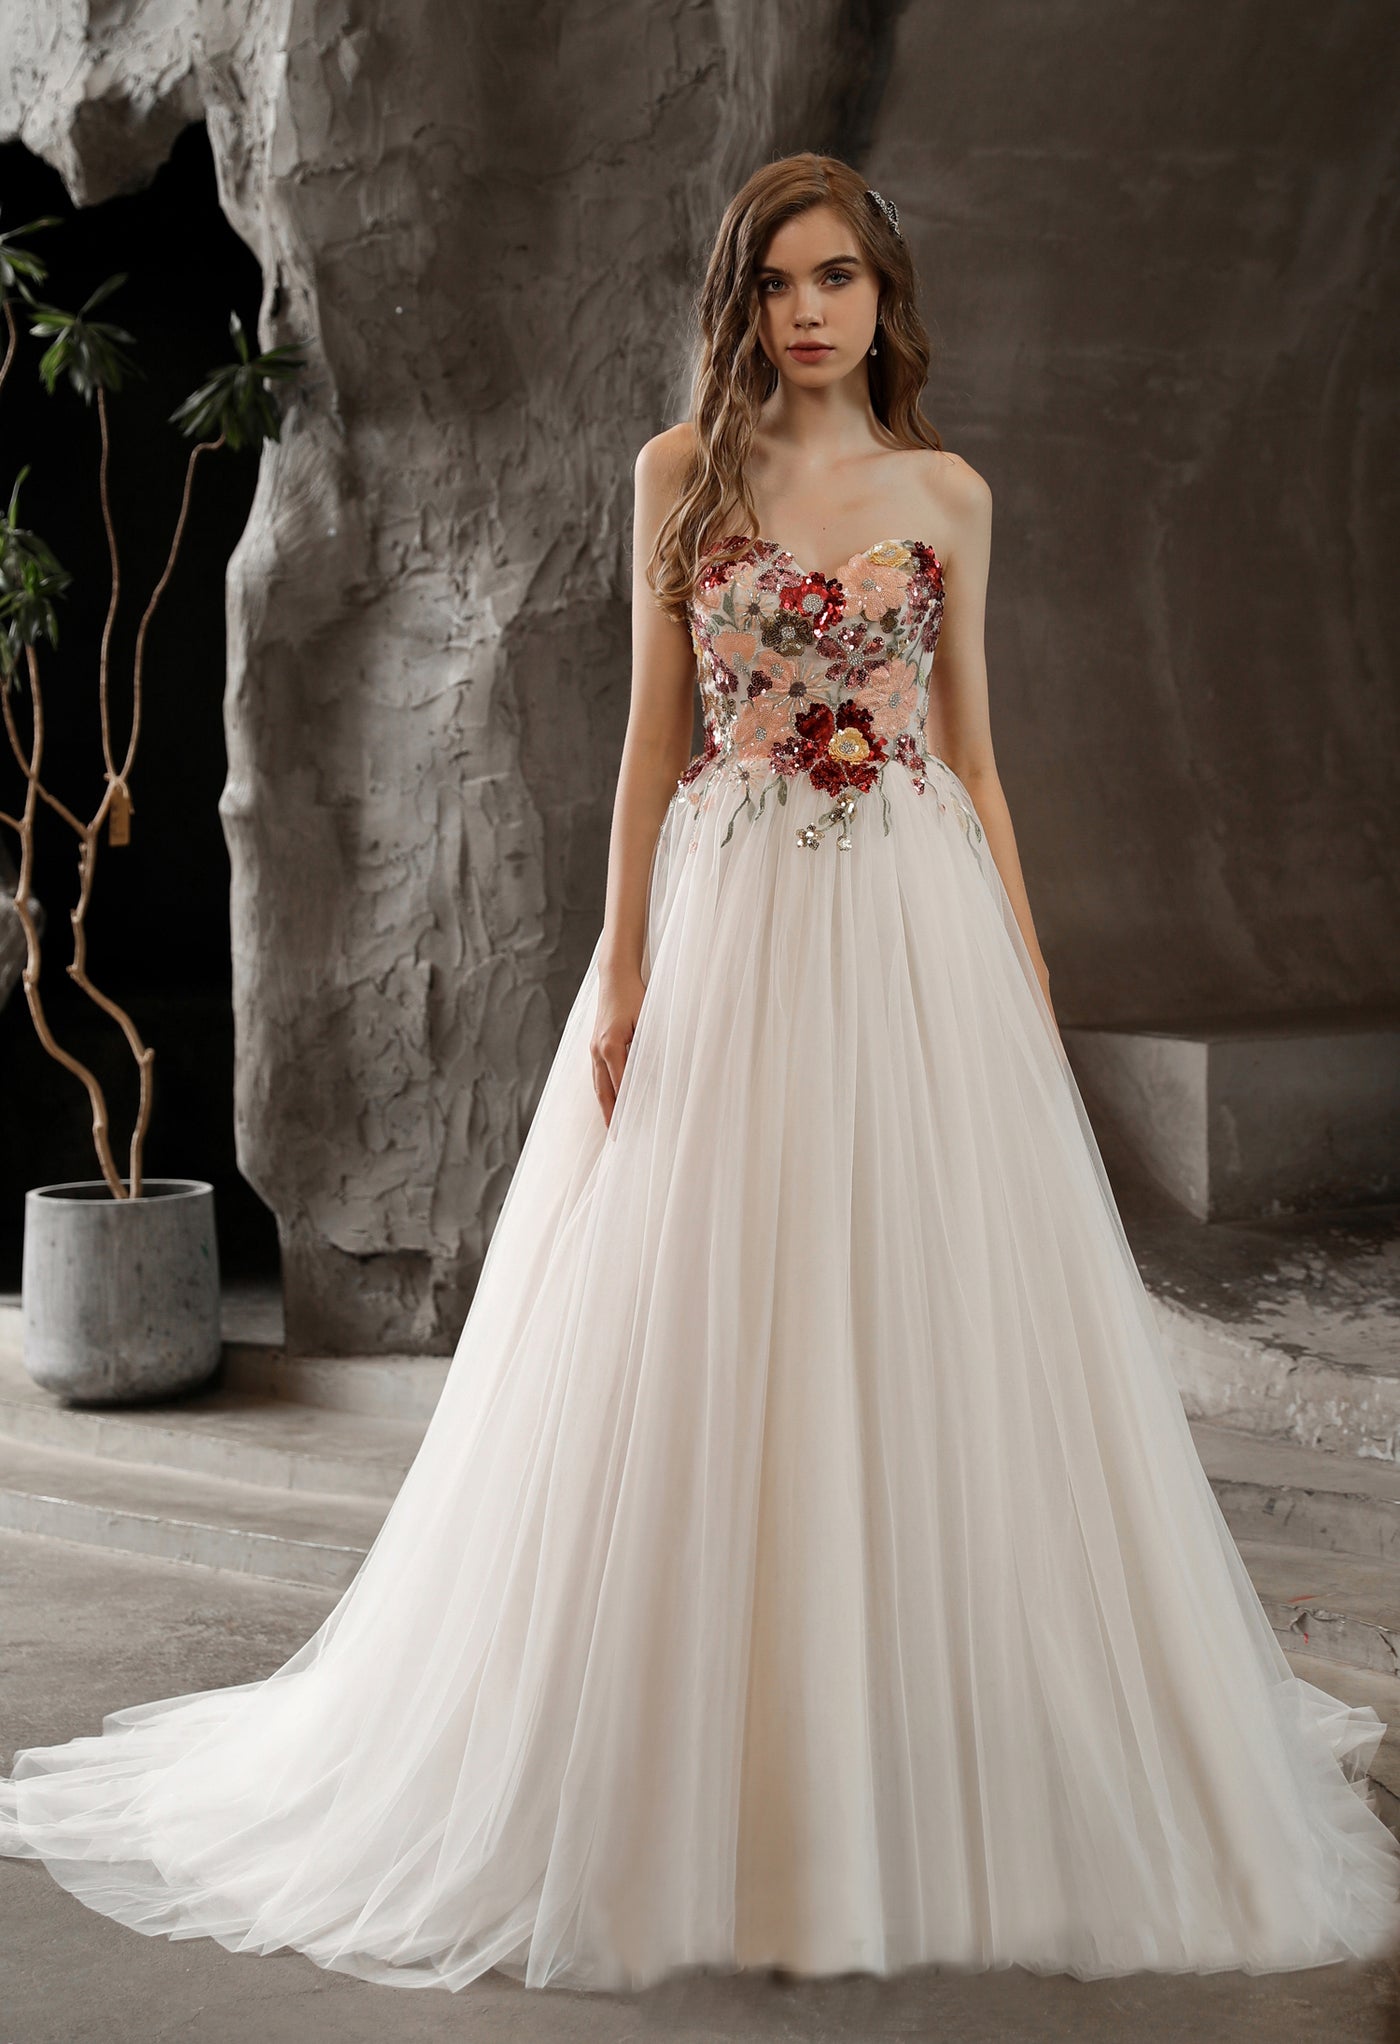 Strapless Princess A-line Bridal Gown with Tulle Skirt and Floral Beaded Bodice